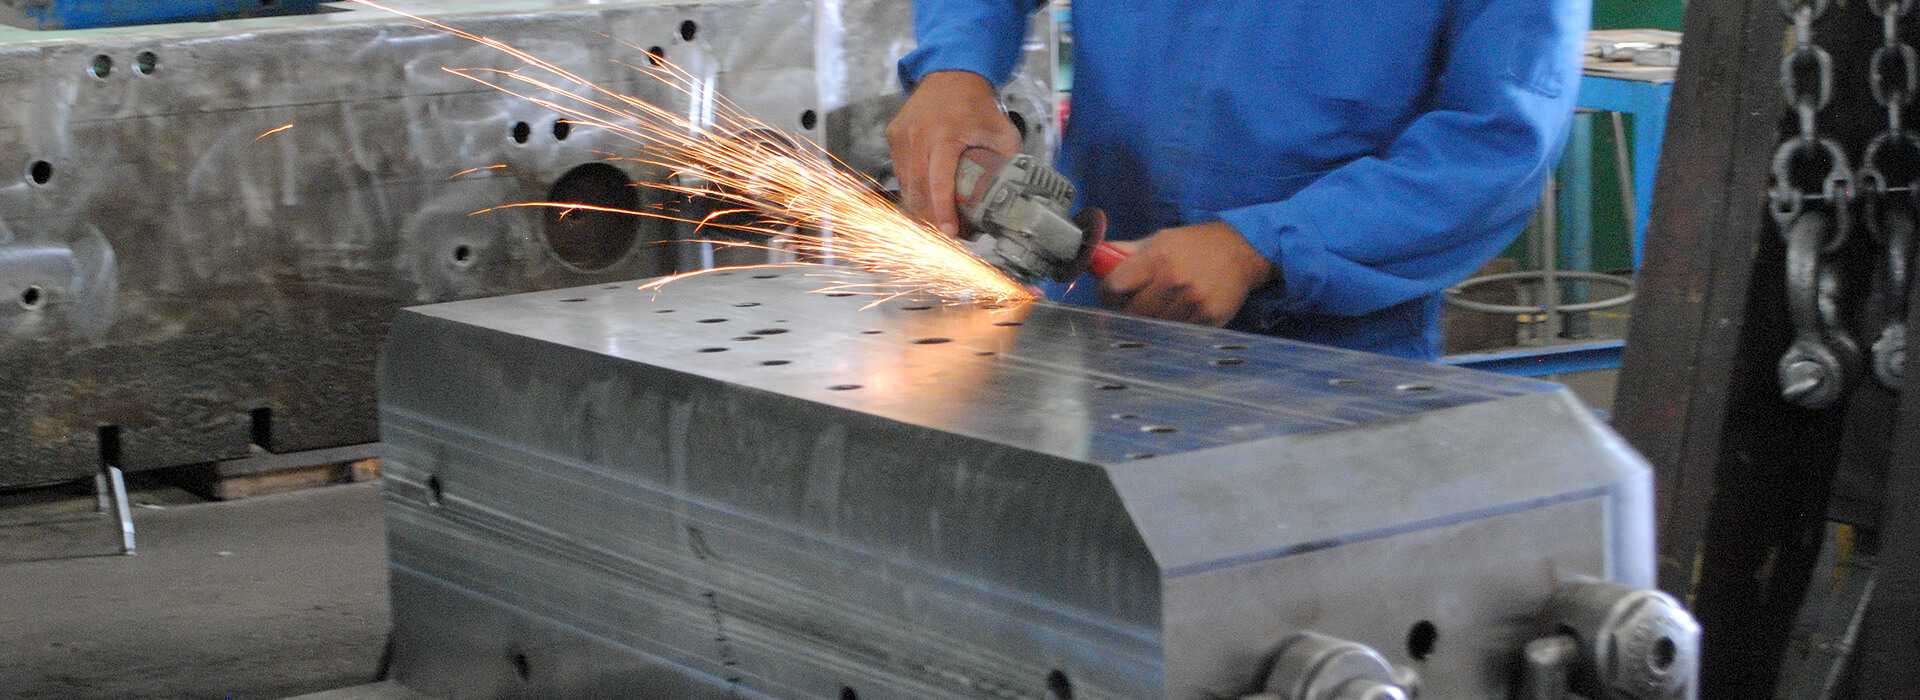 Screen shows a toolmaker using an angle grinder to remove steel from a work piece